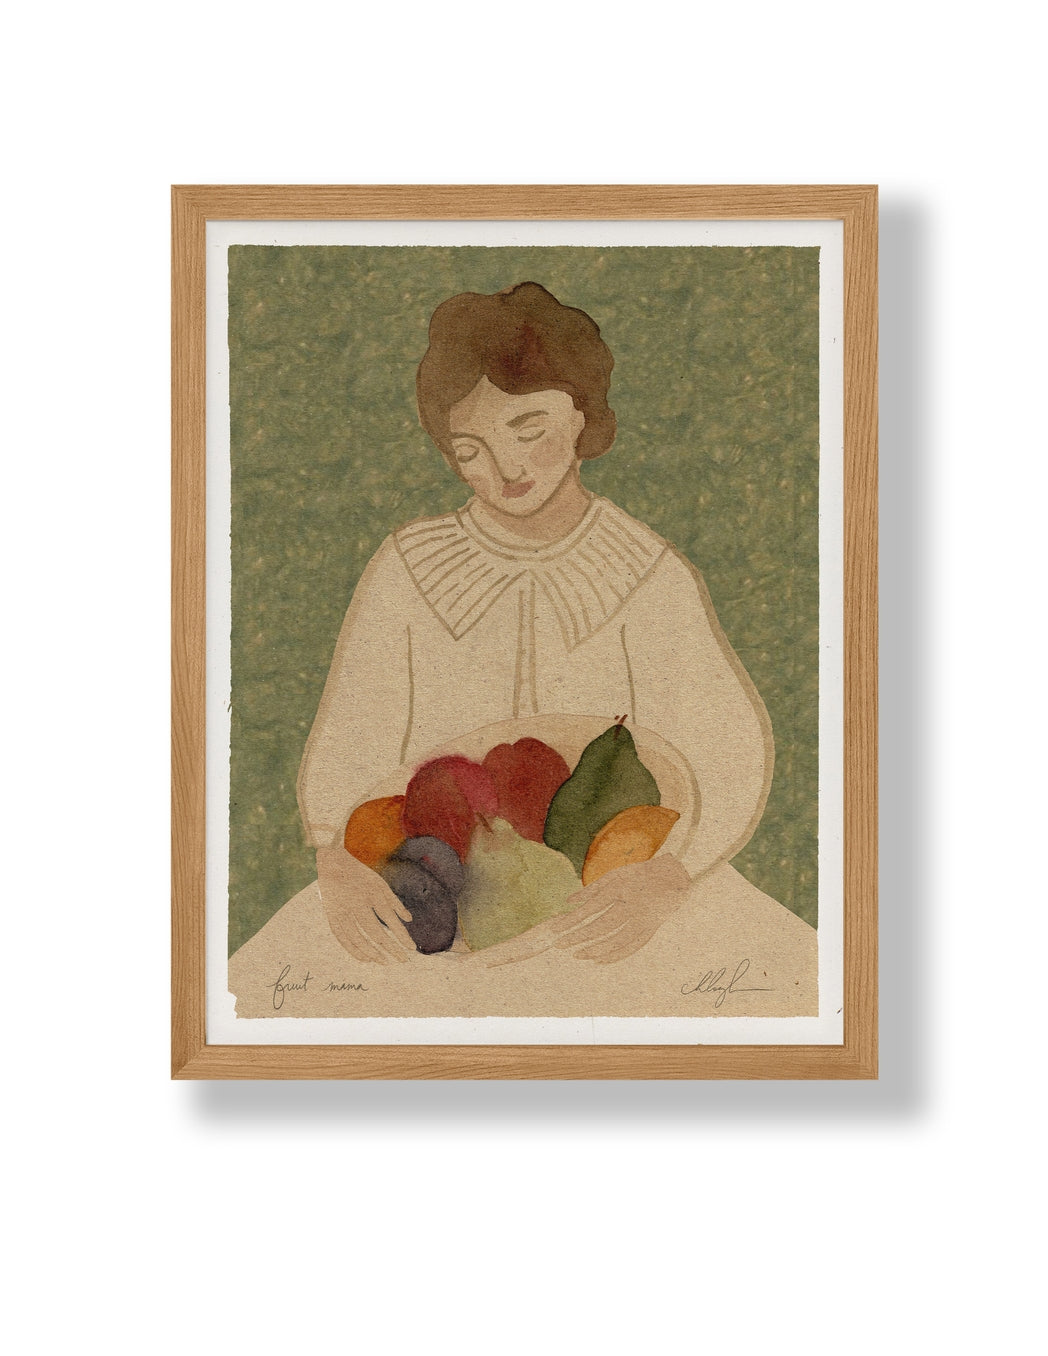 Fruit Mama by Coco Shalom. Prints are made with 100% recycled paper, containing 30% post consumer waste, produced with 100% green power and 0% BS.